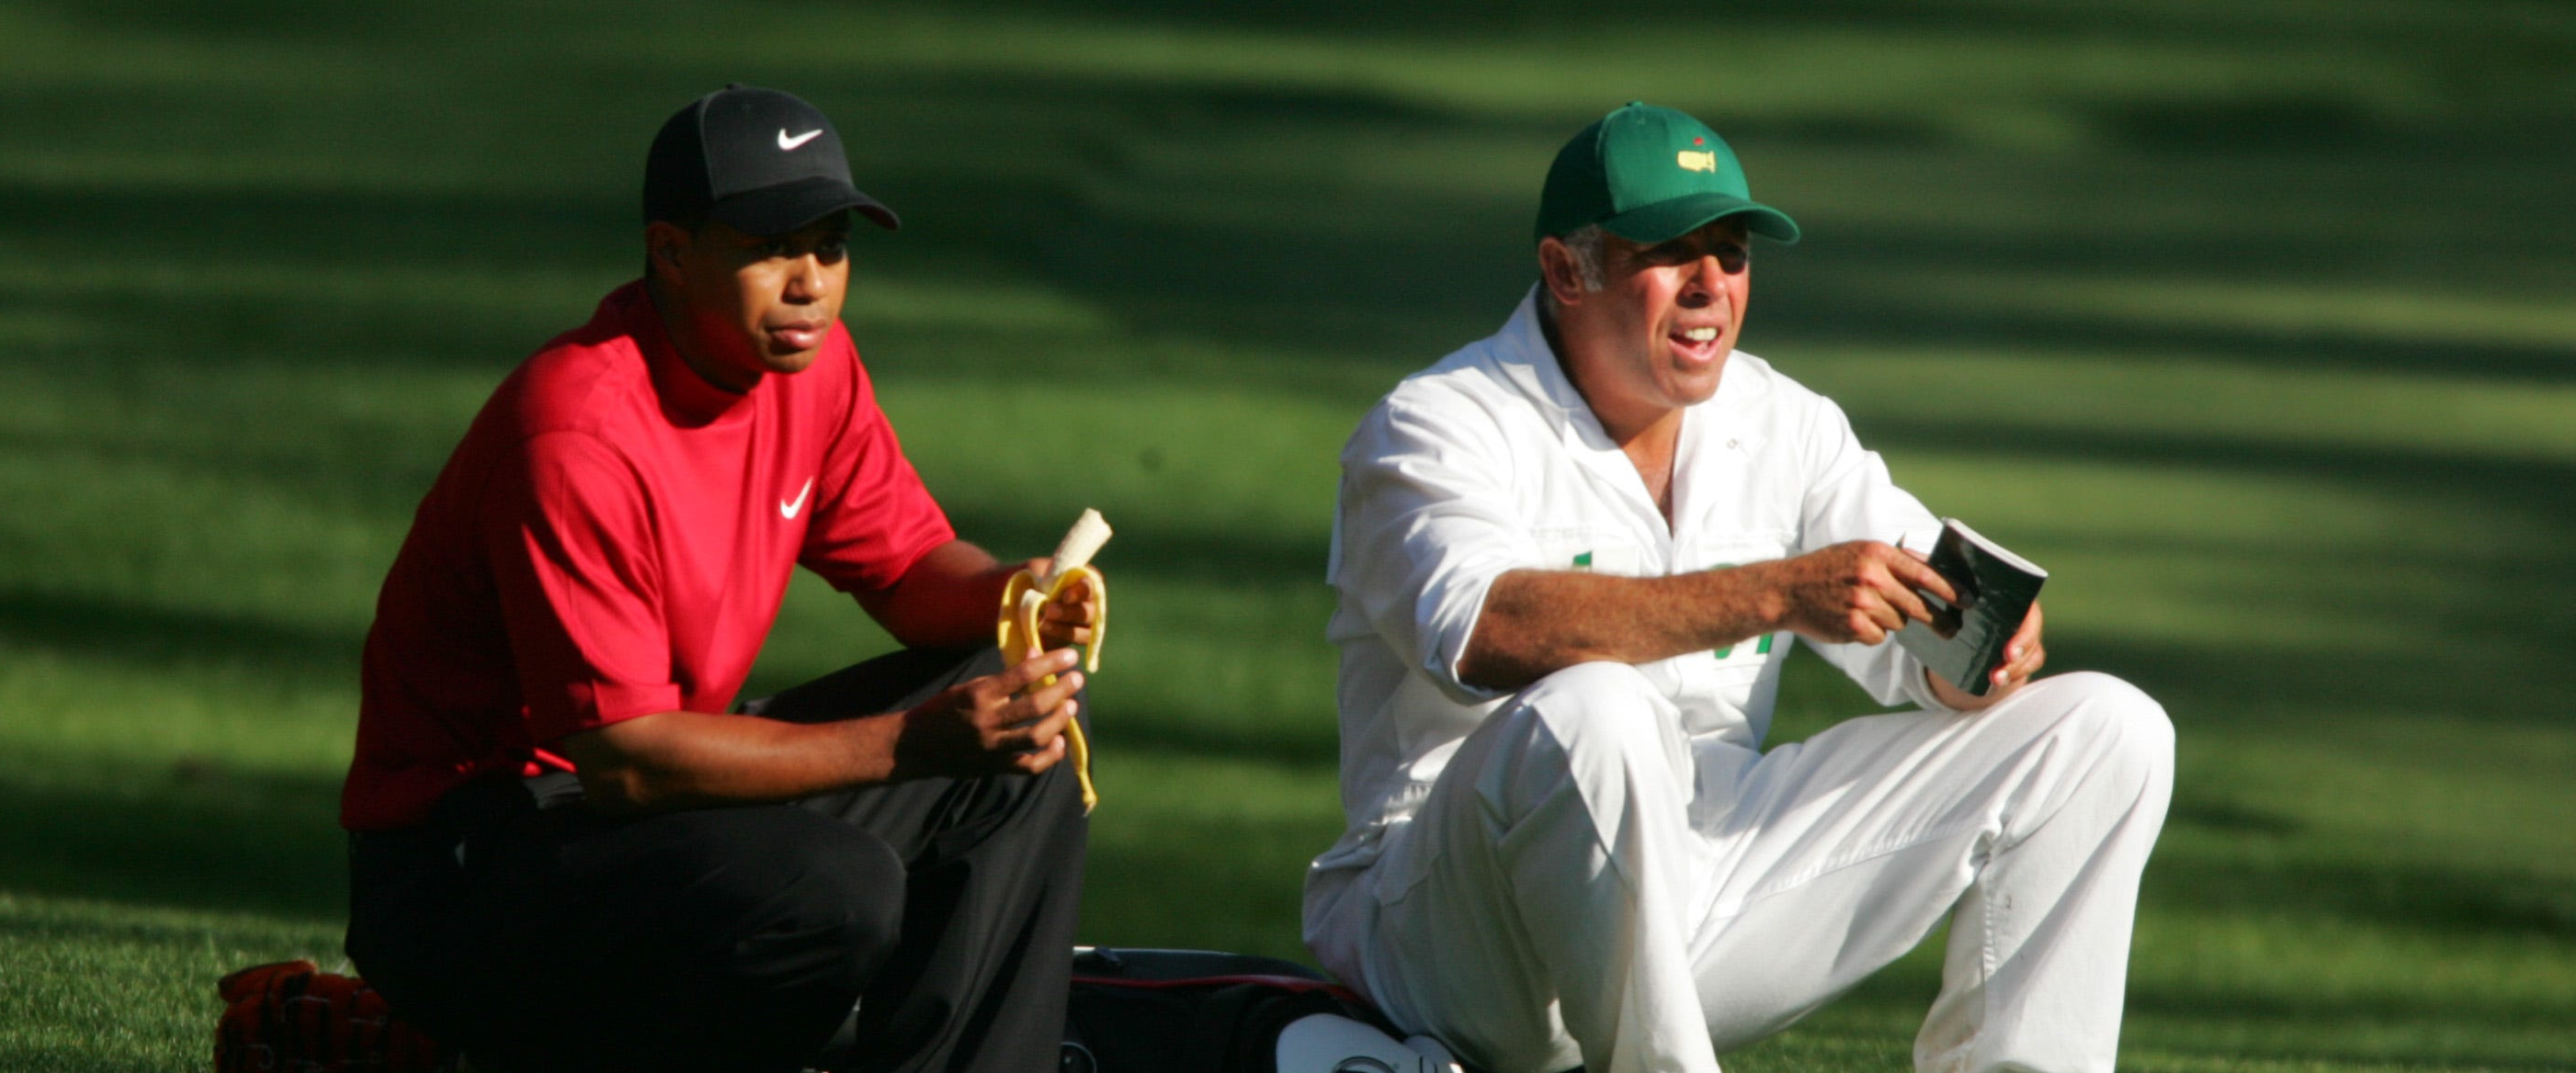 Tiger Woods returning for the Masters would be too perfect